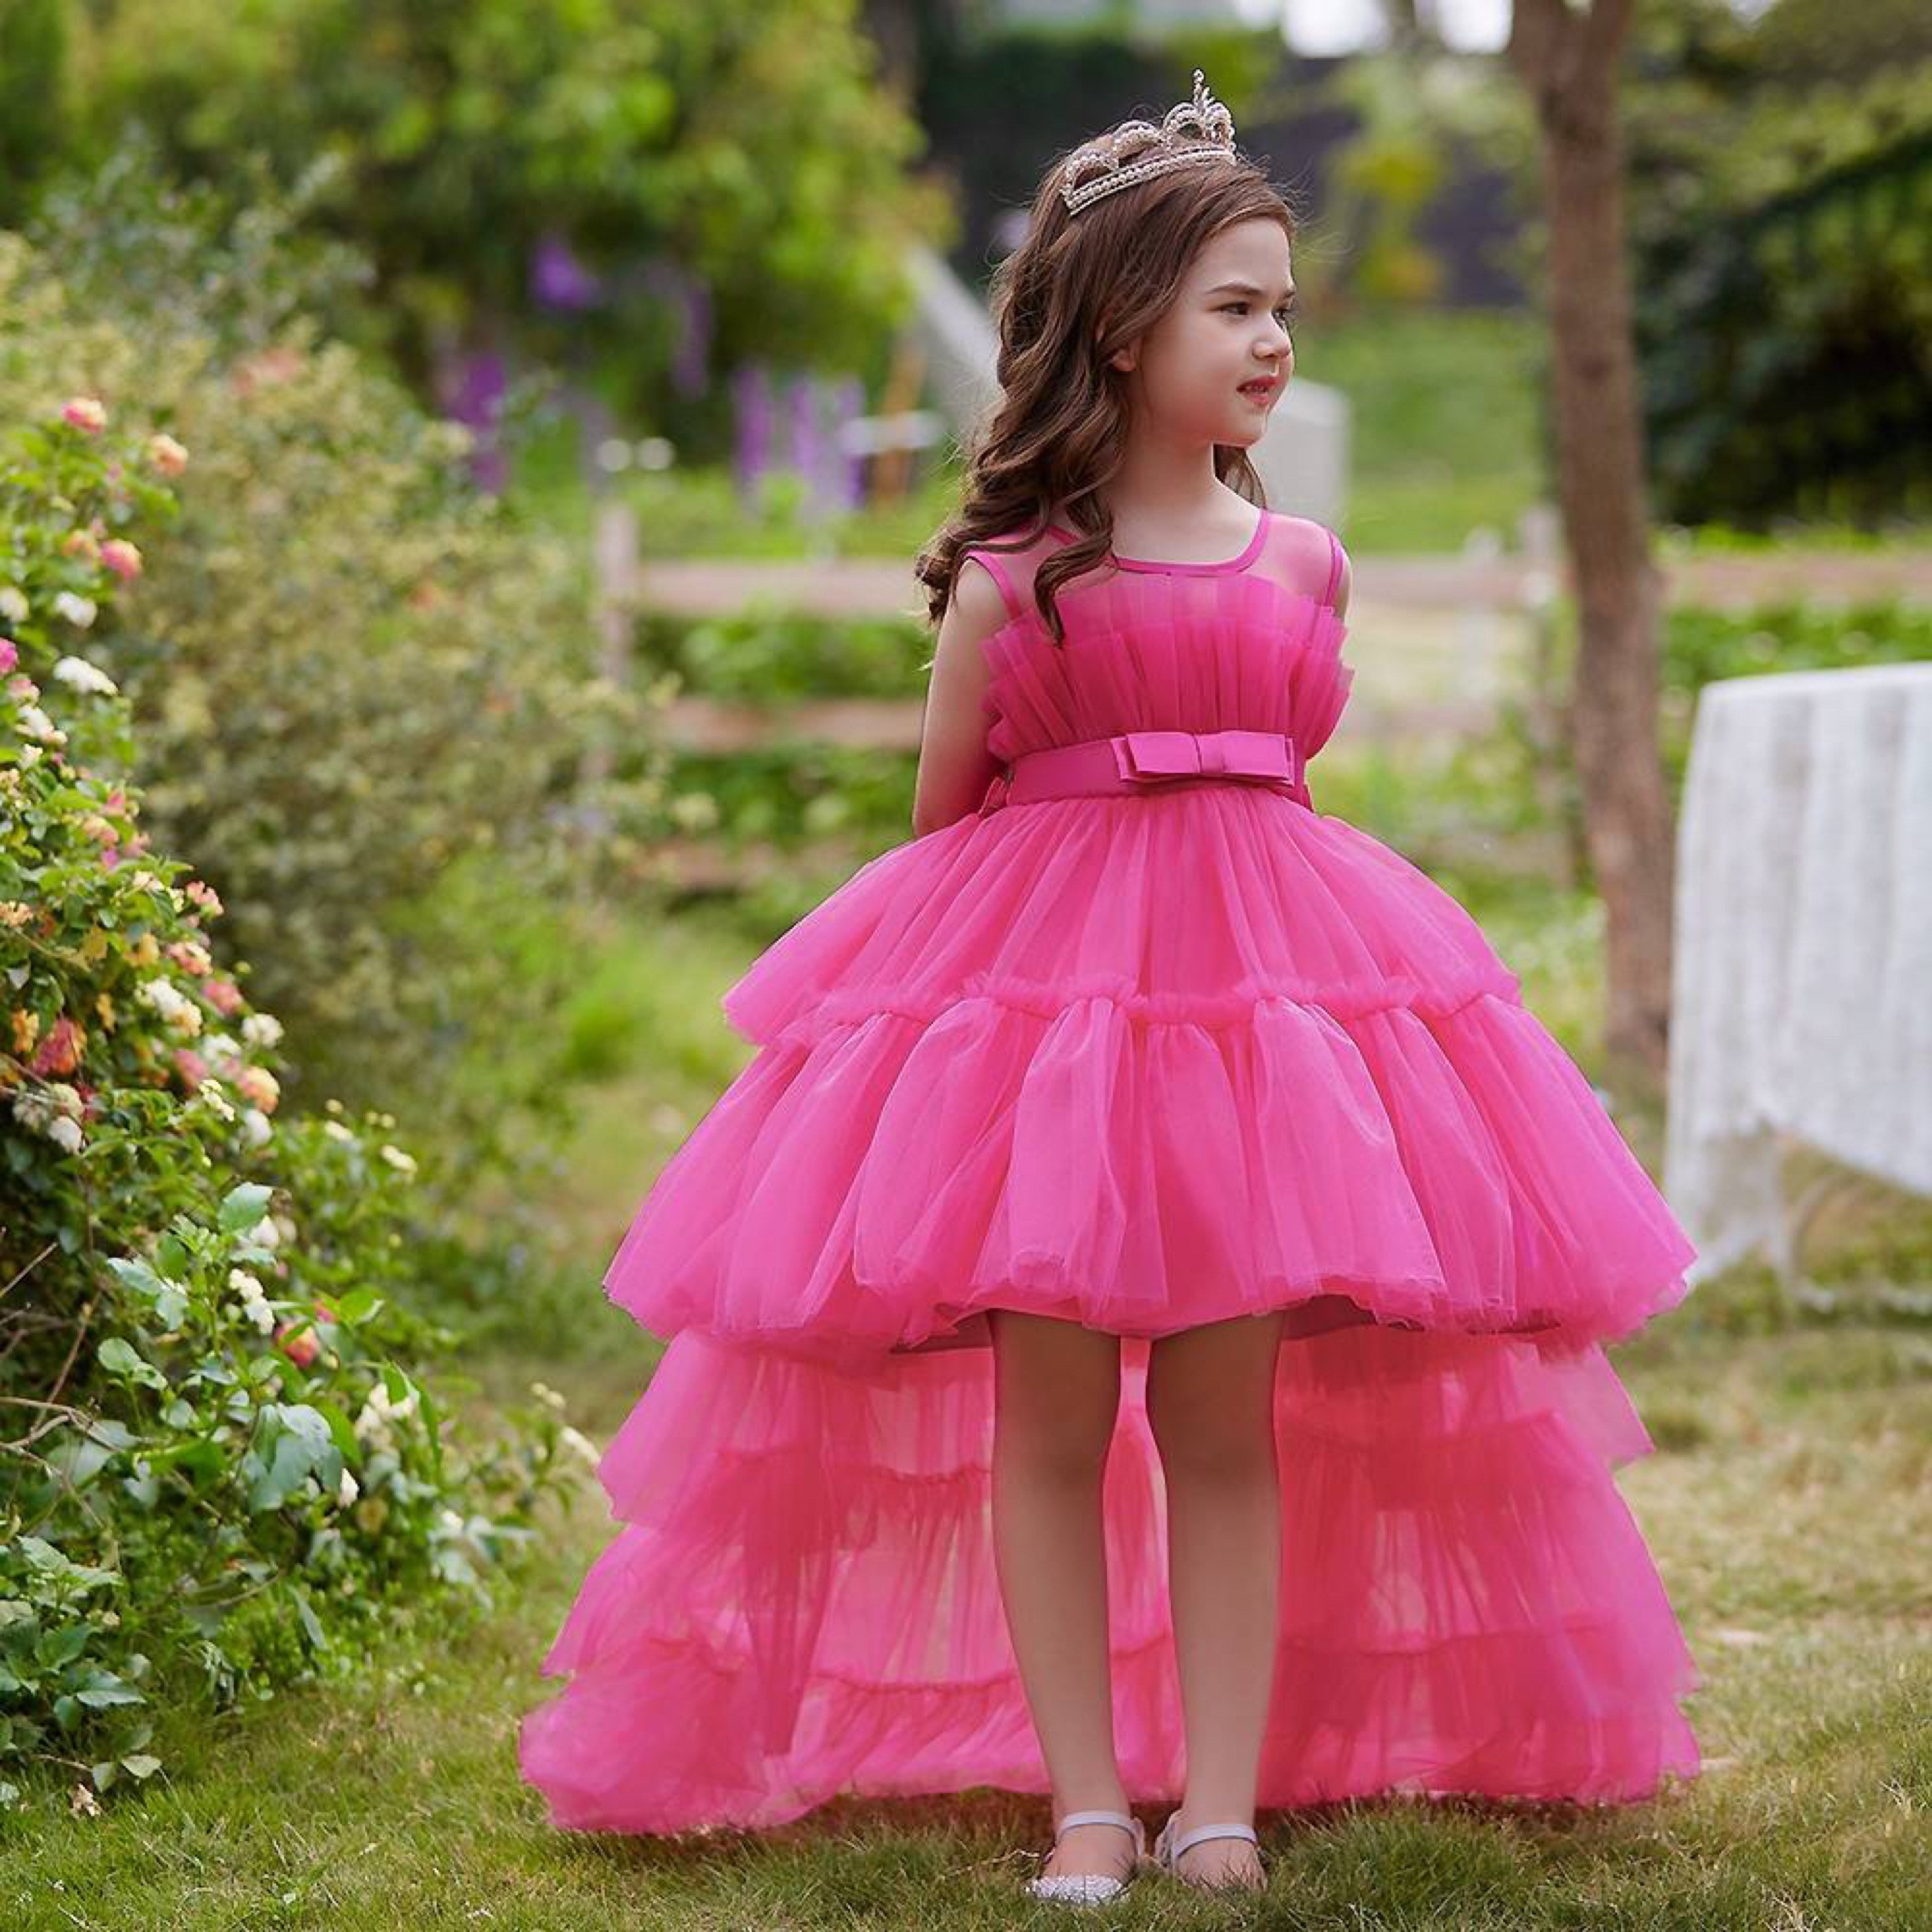 Barbie Dress Flower Girl Lace Dress With Tail Toddler - Etsy